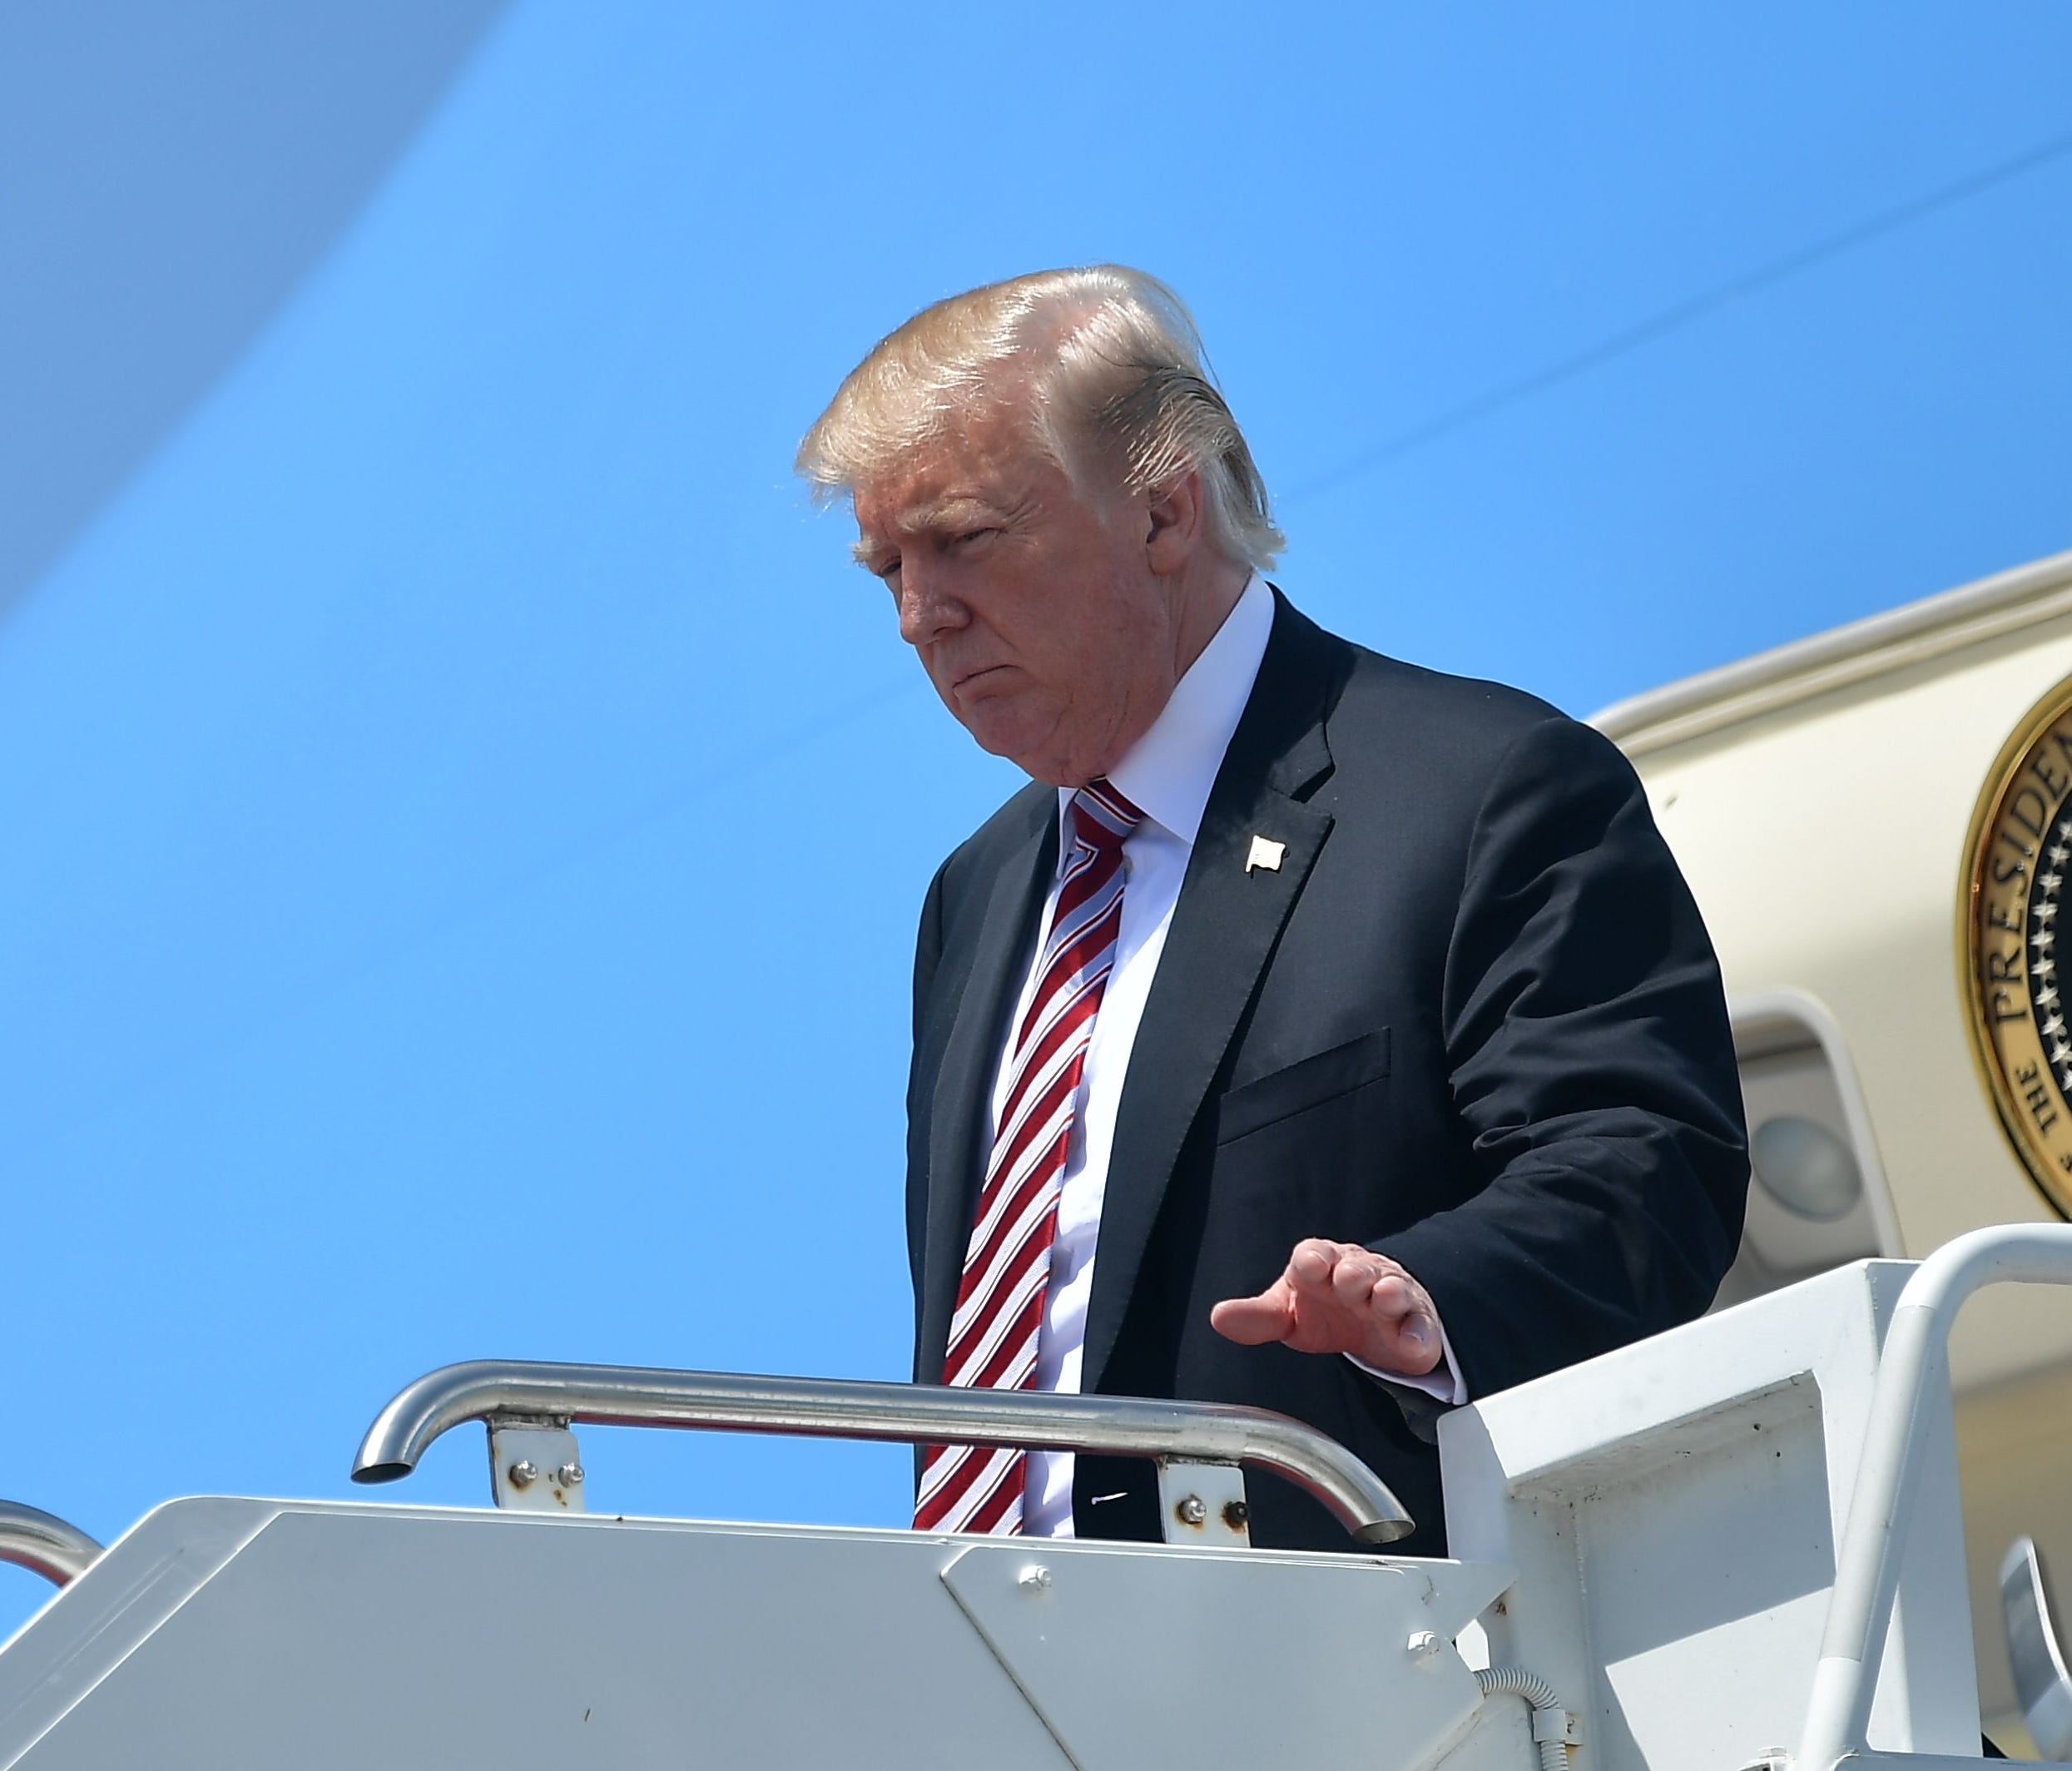 US President Donald Trump steps off Air Force One upon arrival at Palm Beach International in West Palm Beach, Florida on April 18, 2018. / AFP PHOTO / MANDEL NGANMANDEL NGAN/AFP/Getty Images ORIG FILE ID: AFP_1461PT